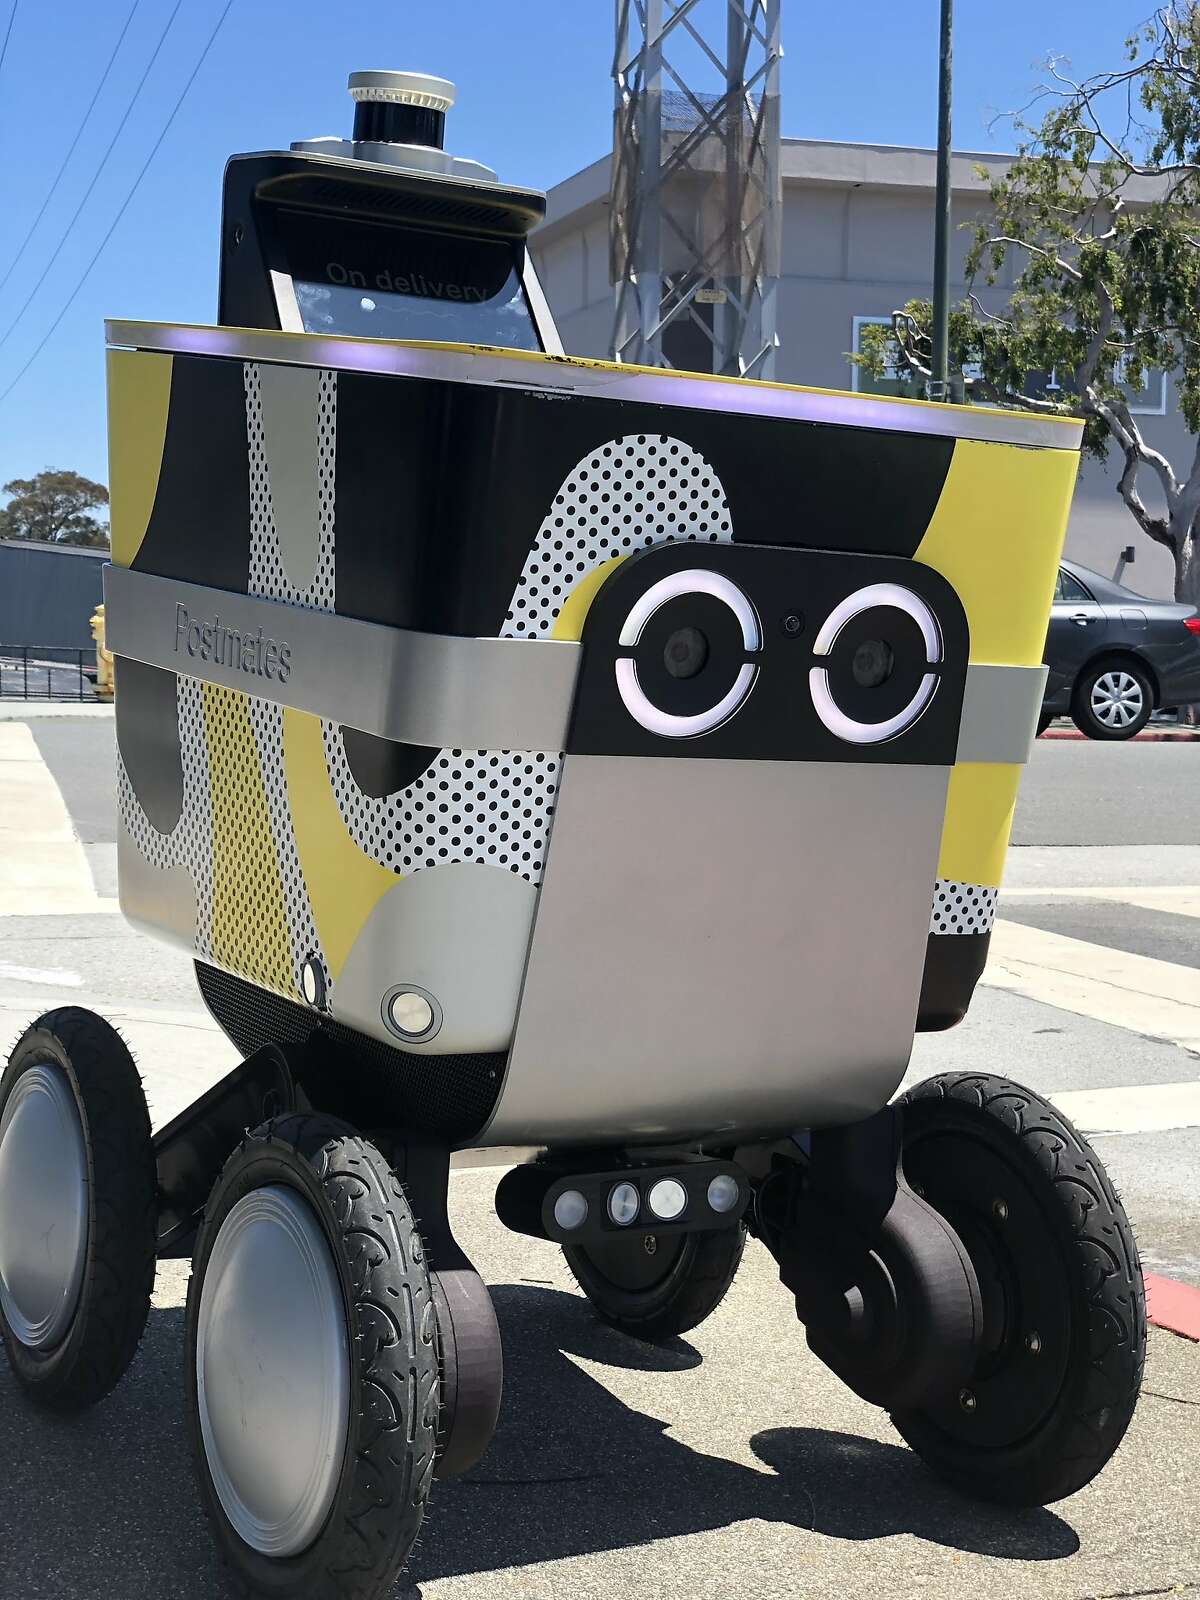 Postmates received a permit to start testing its autonomous delivery robot, Serve, in San Francisco.